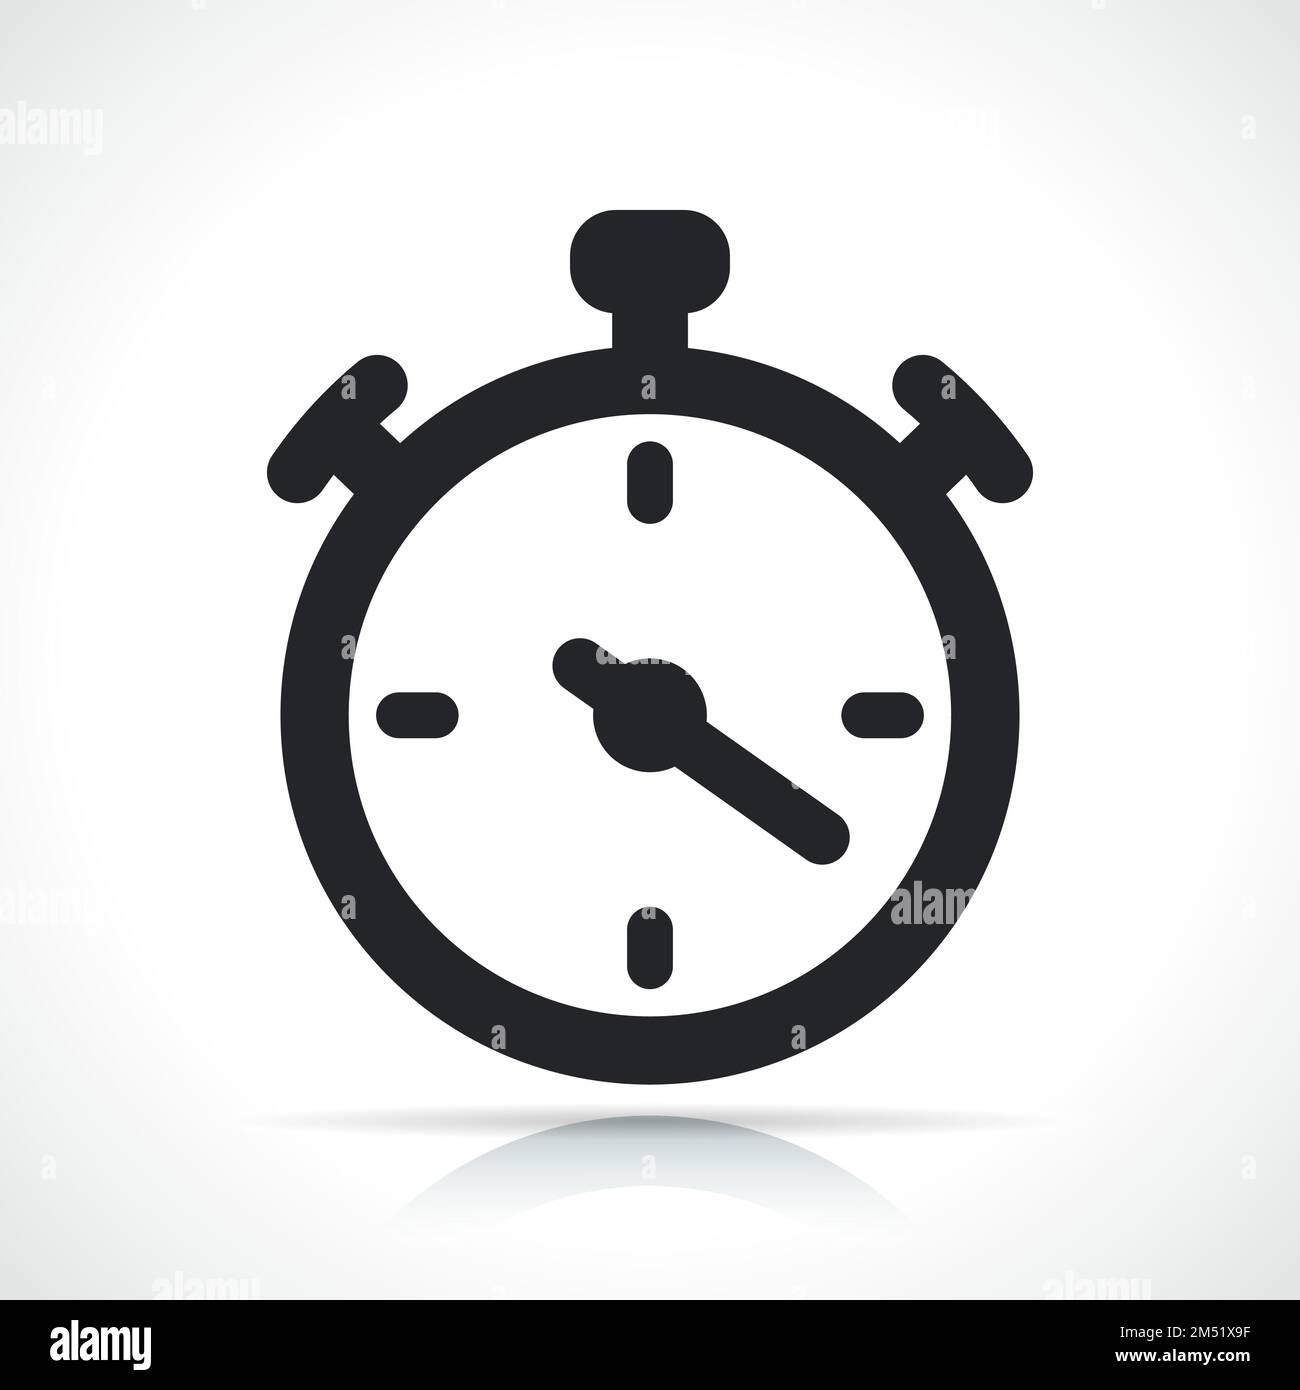 Illustration of stopwatch or chronometer black icon Stock Vector